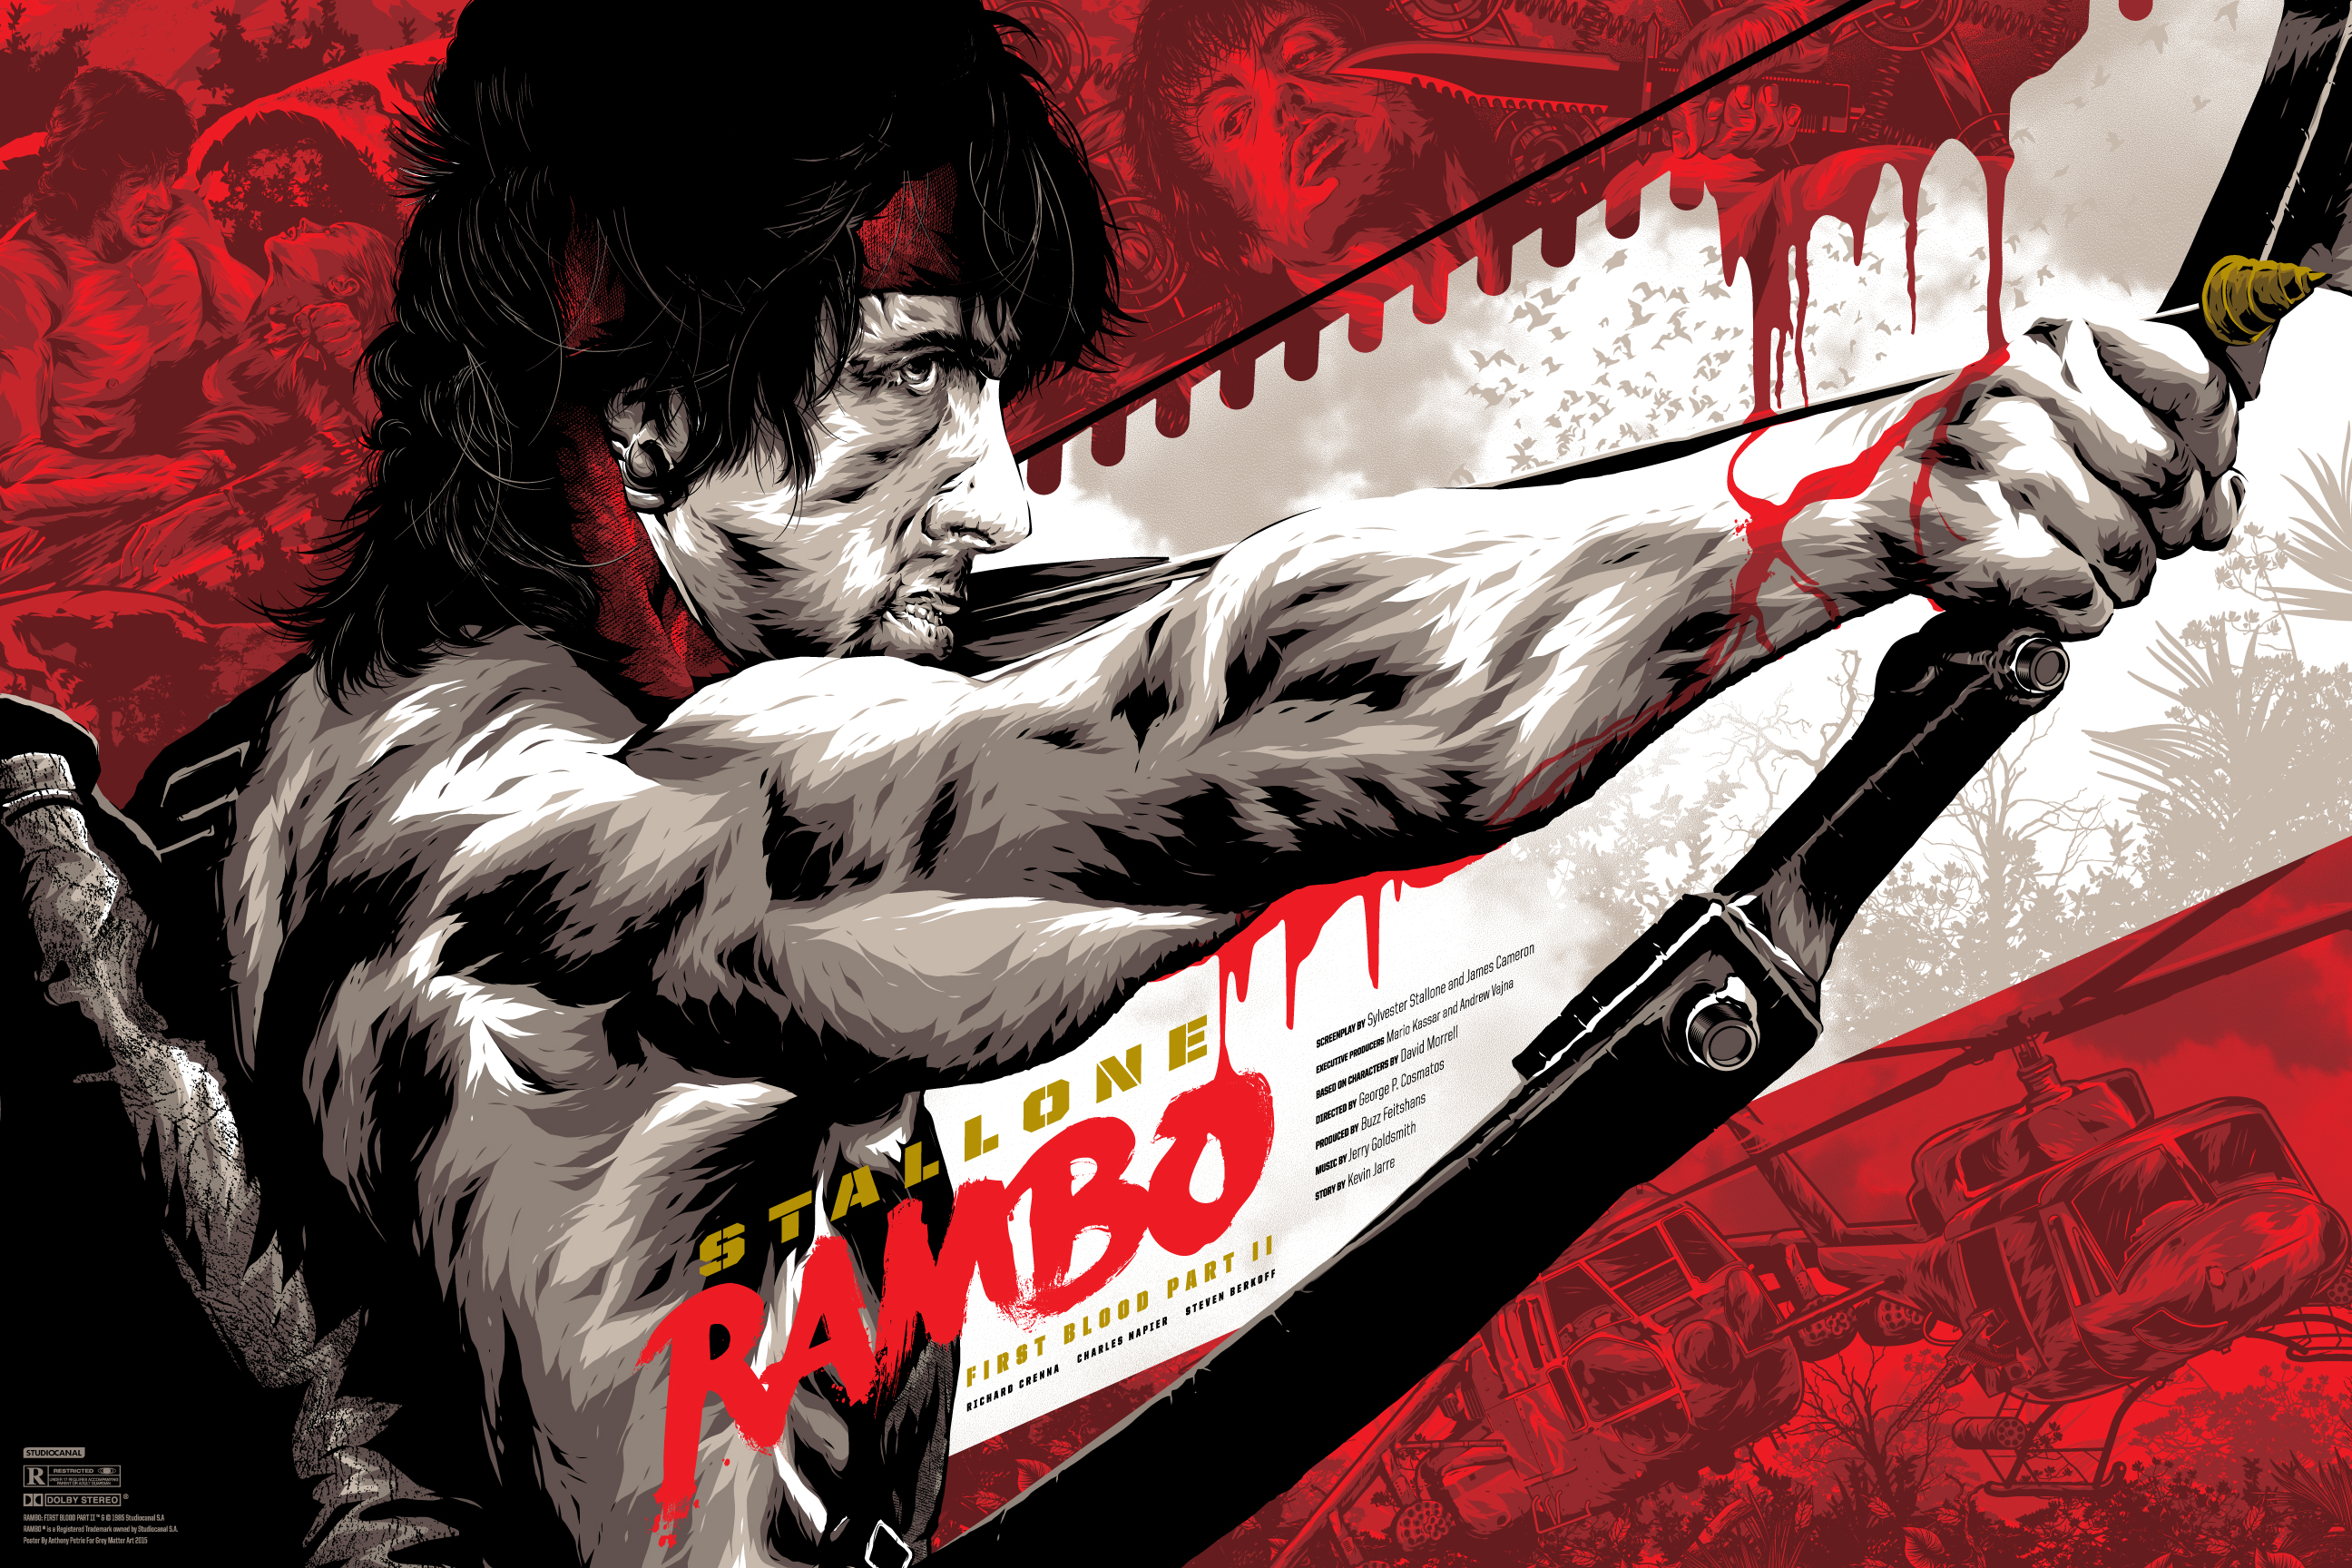 grey-matter-is-releasing-new-art-from-rambo-first-blood-part-ii-hi